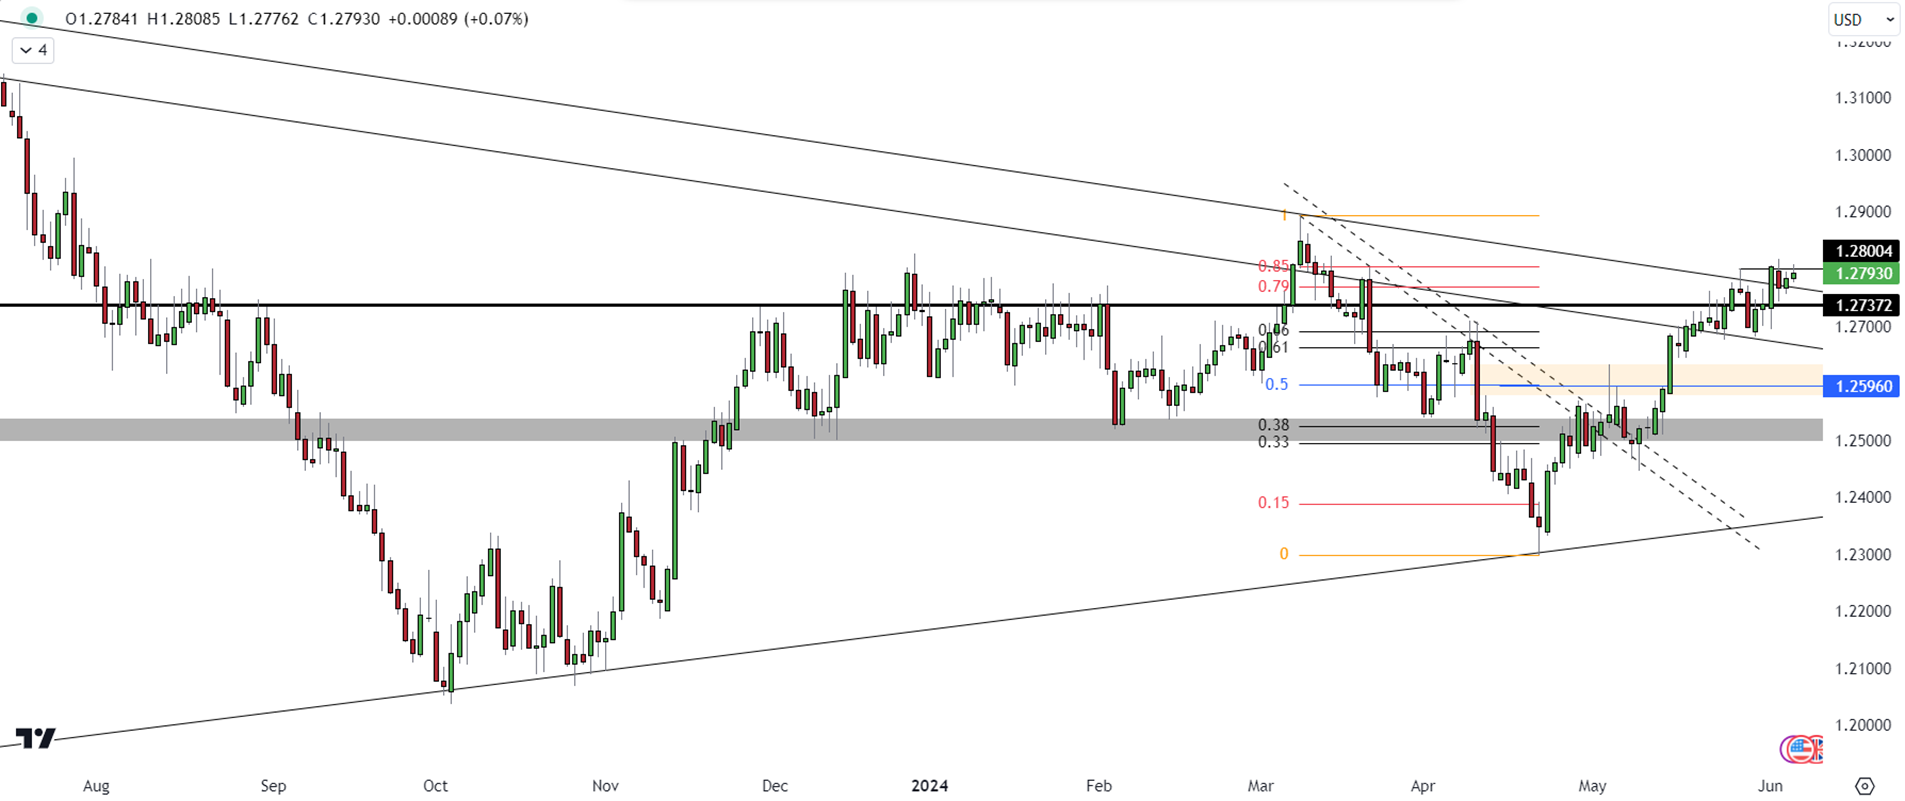 GBP/USD Tests Key Resistance Levels Amid Uptrend